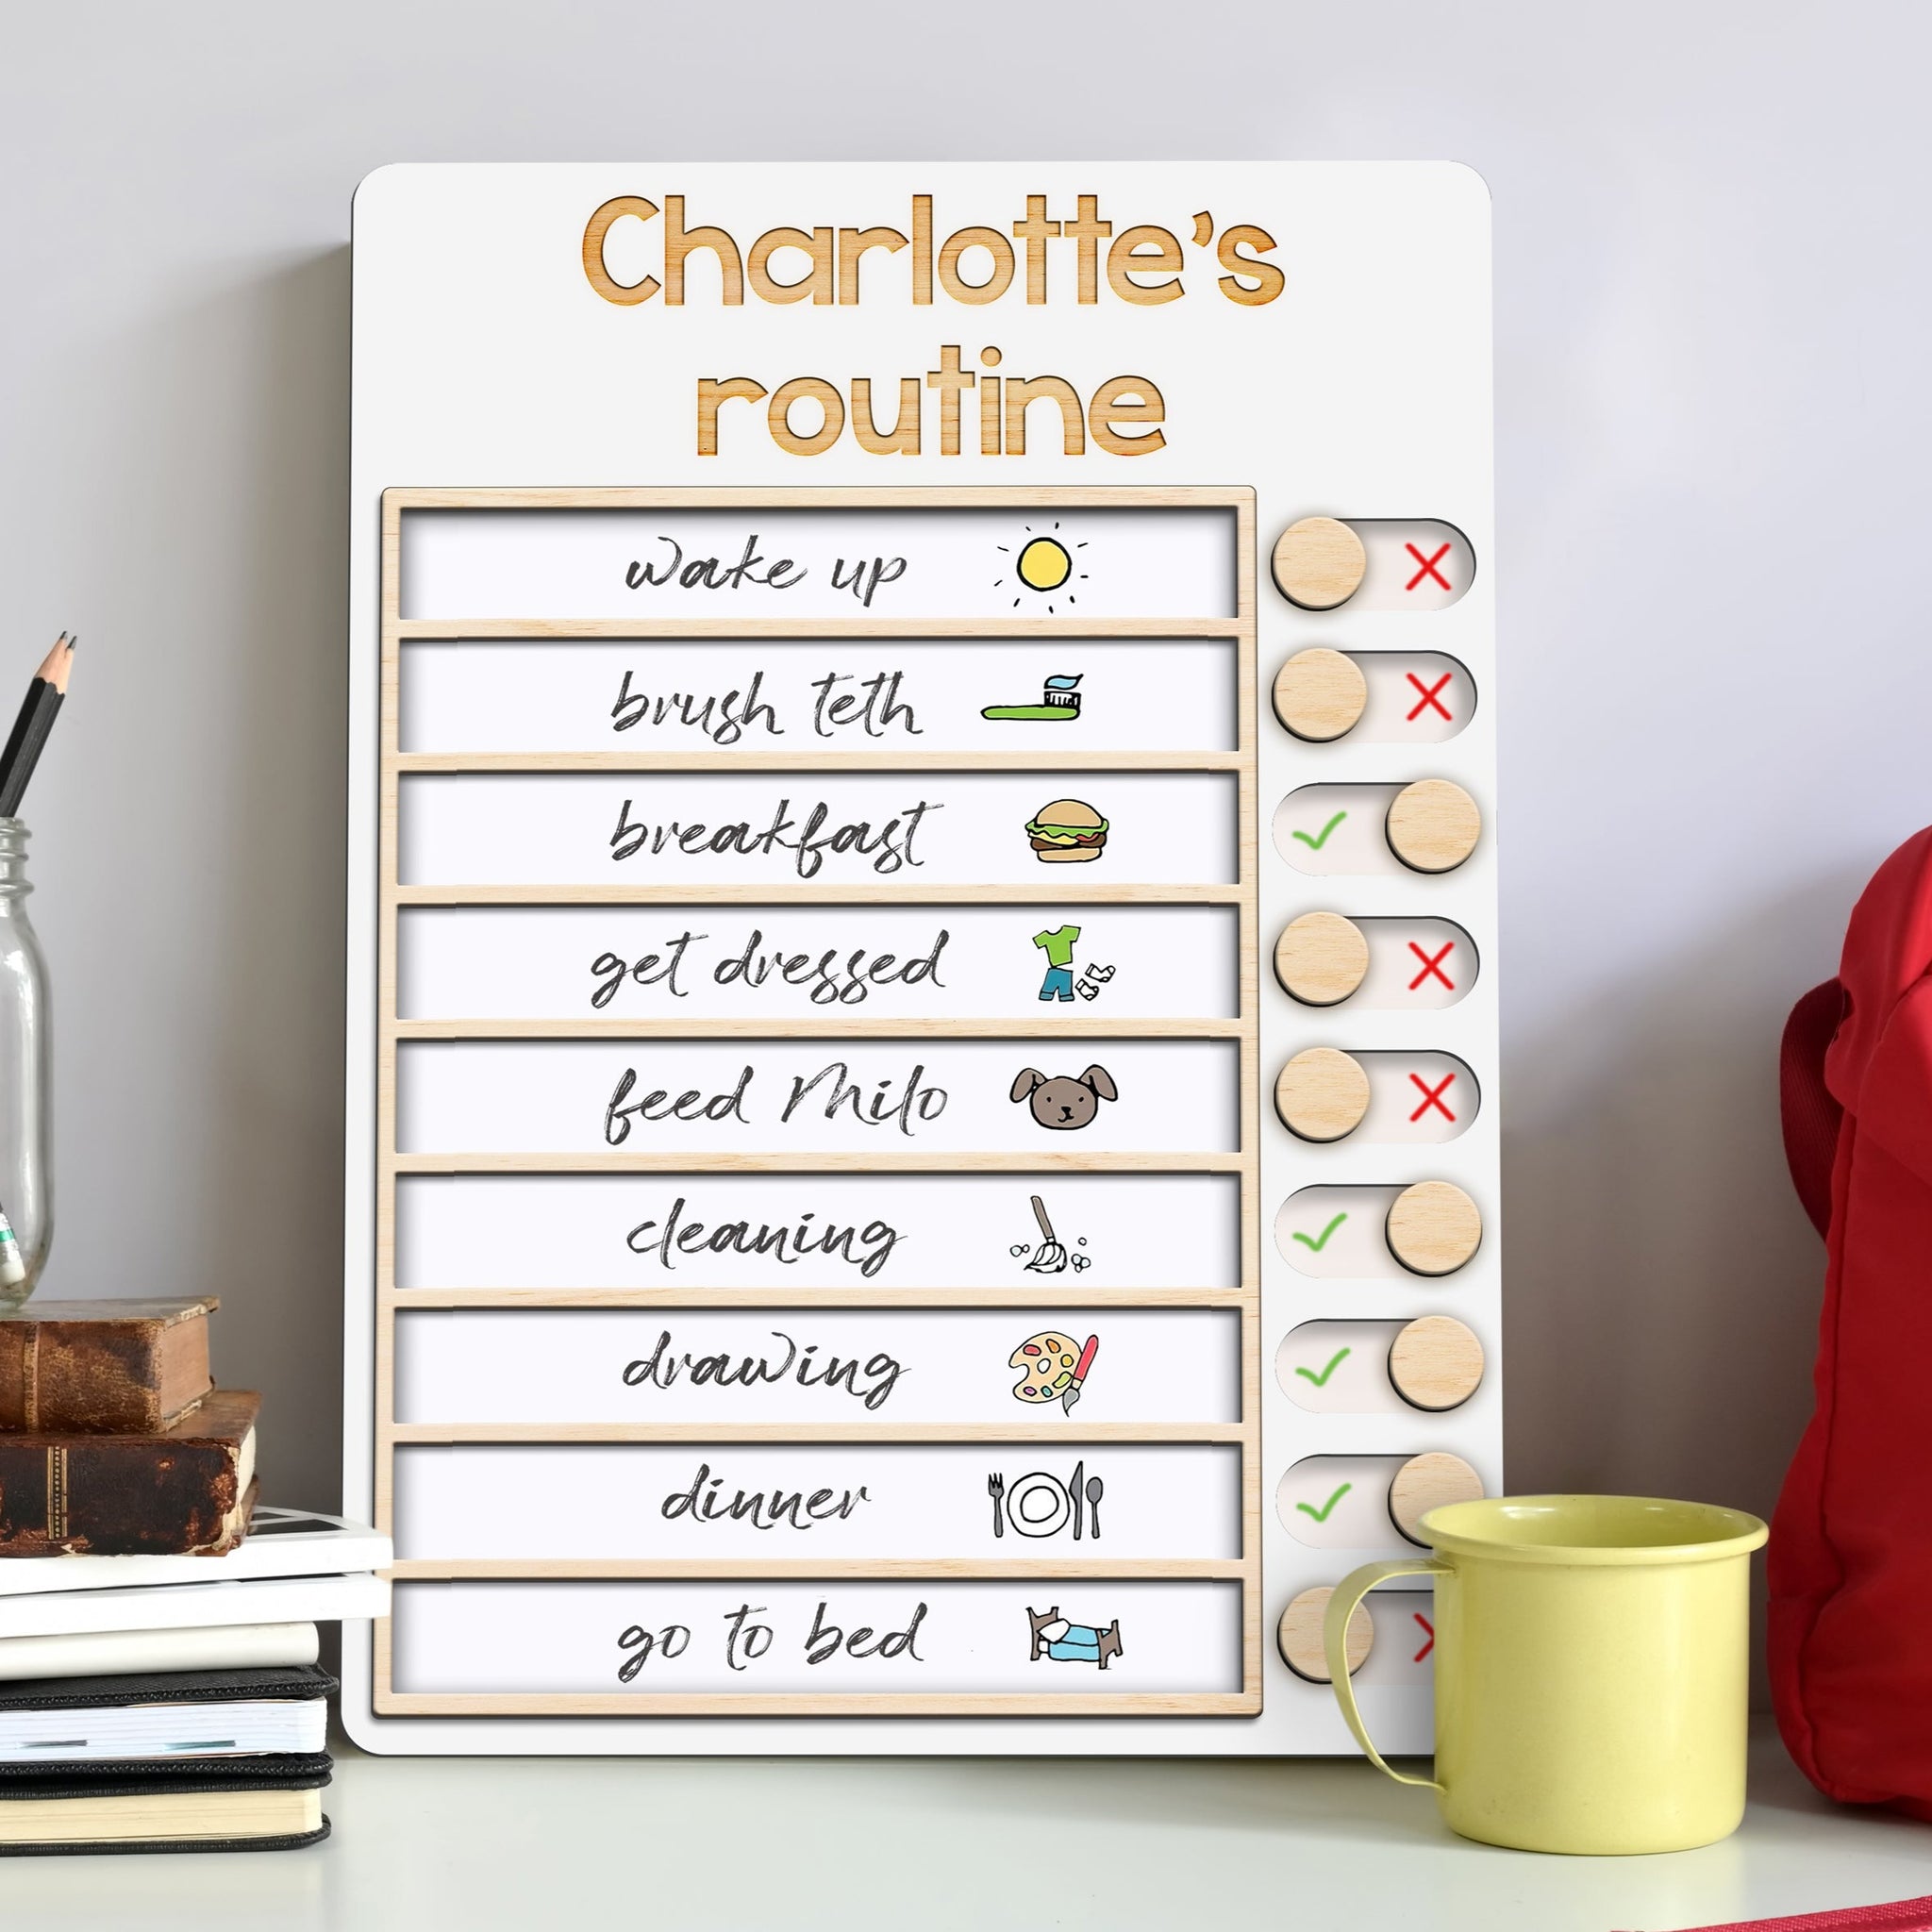 Daily Routine Chart, Morning and beadtime routine chart, daily routine chore chart by age, Sliding routine chart, PR11